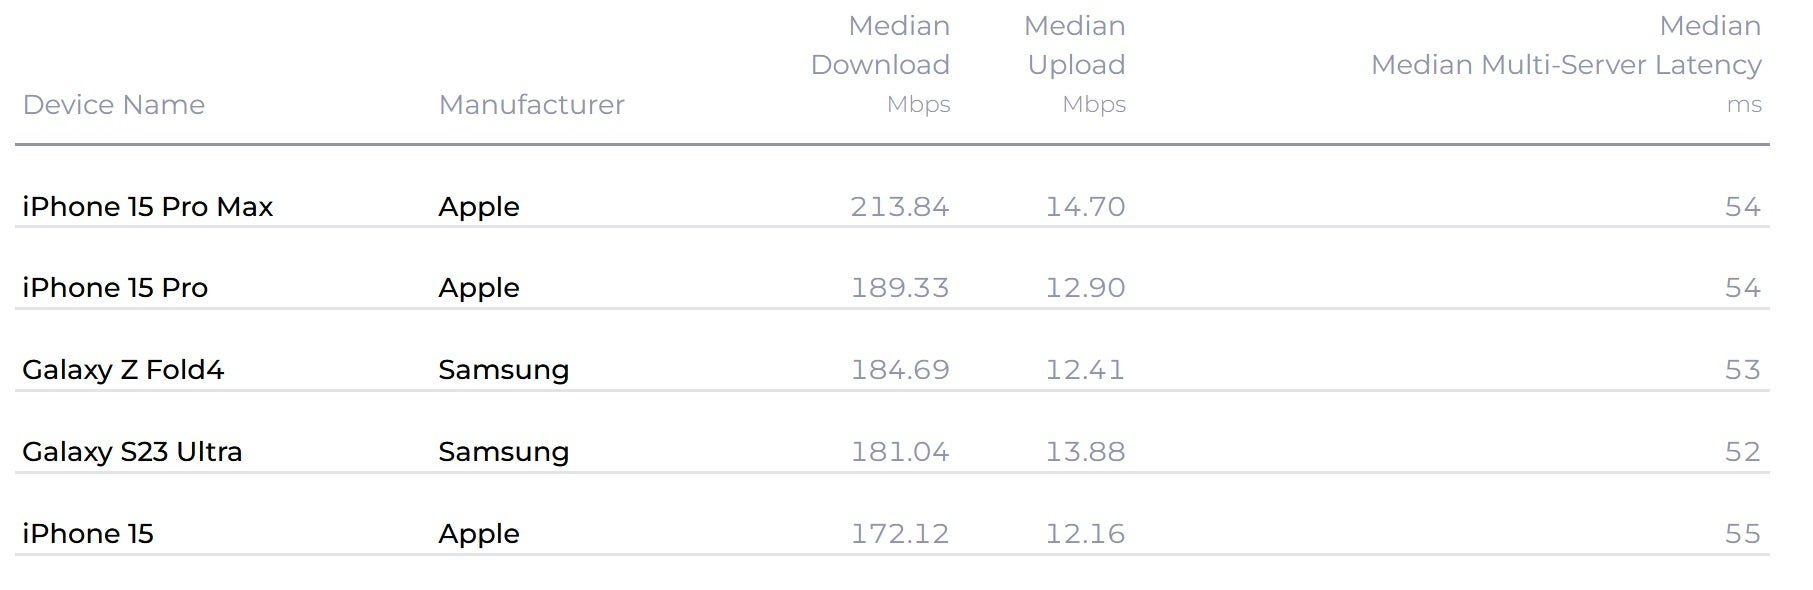 The Apple iPhone 15 Pro Max was the fastest phone in the U.S. during Q4 - Ookla's Speedtest report reveals the fastest phone in the U.S. during Q4